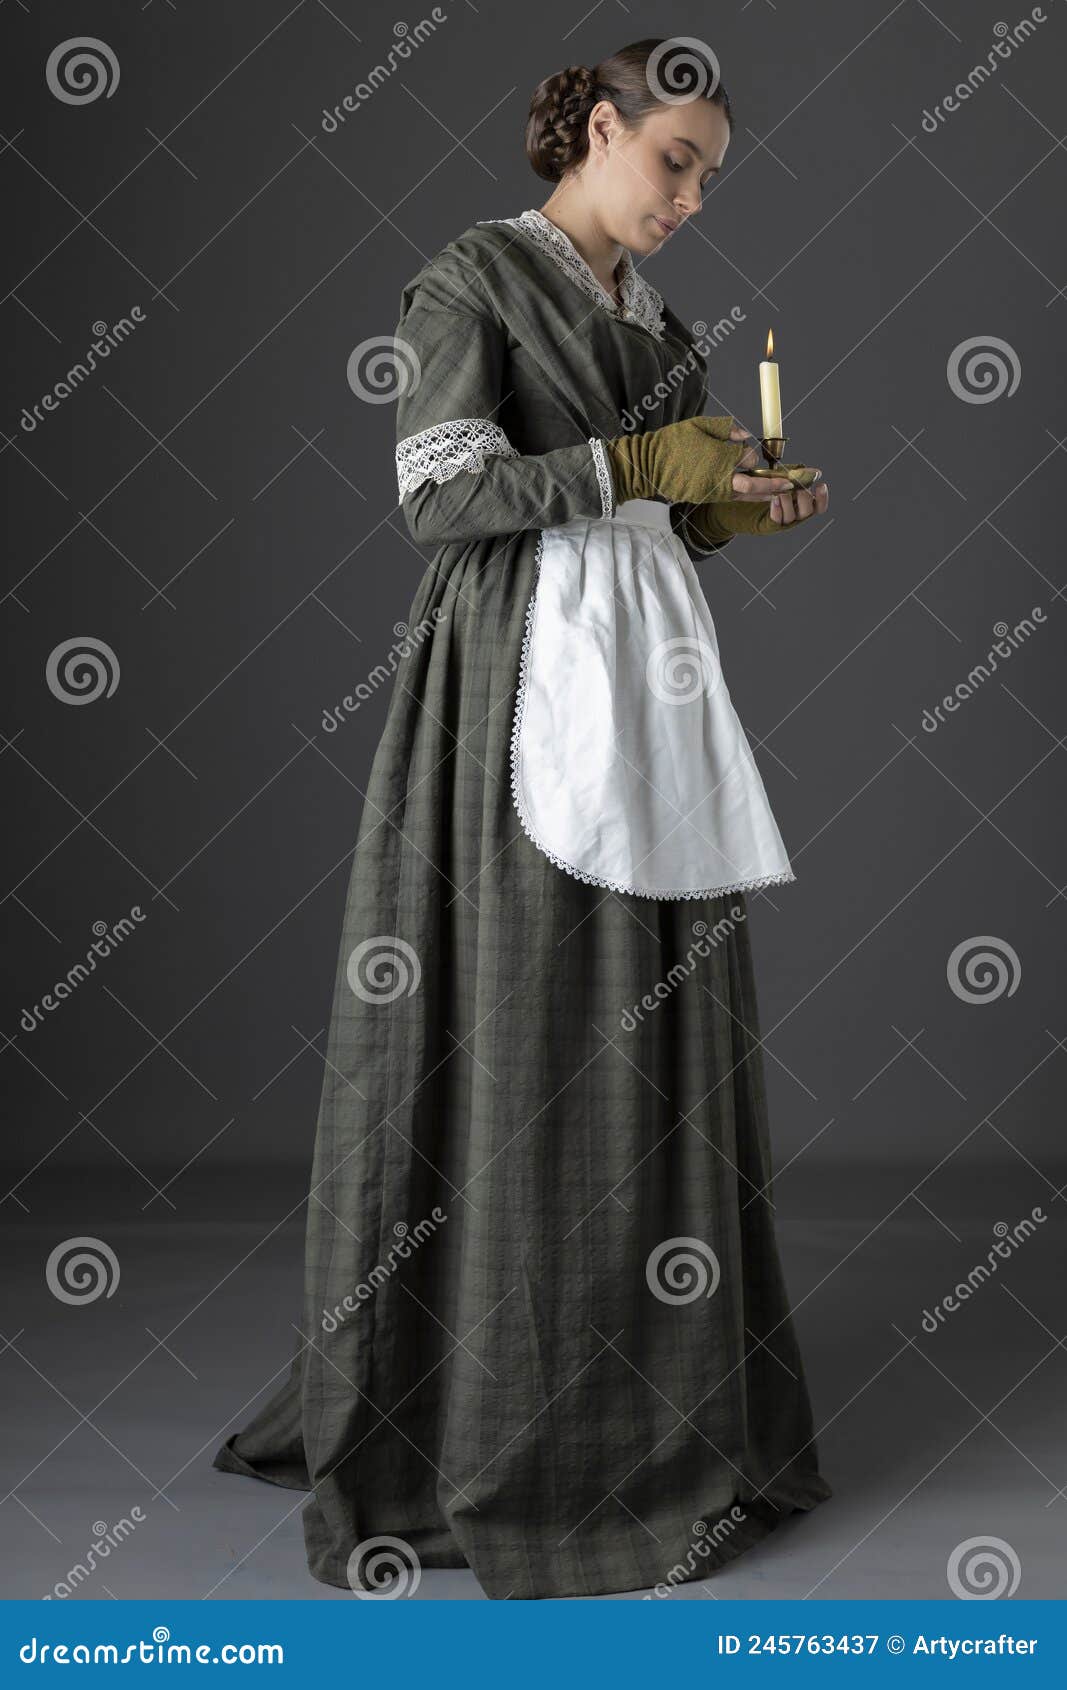 a working class victorian woman wearing a dark green check bodice and skirt with an apron and holding a candle.